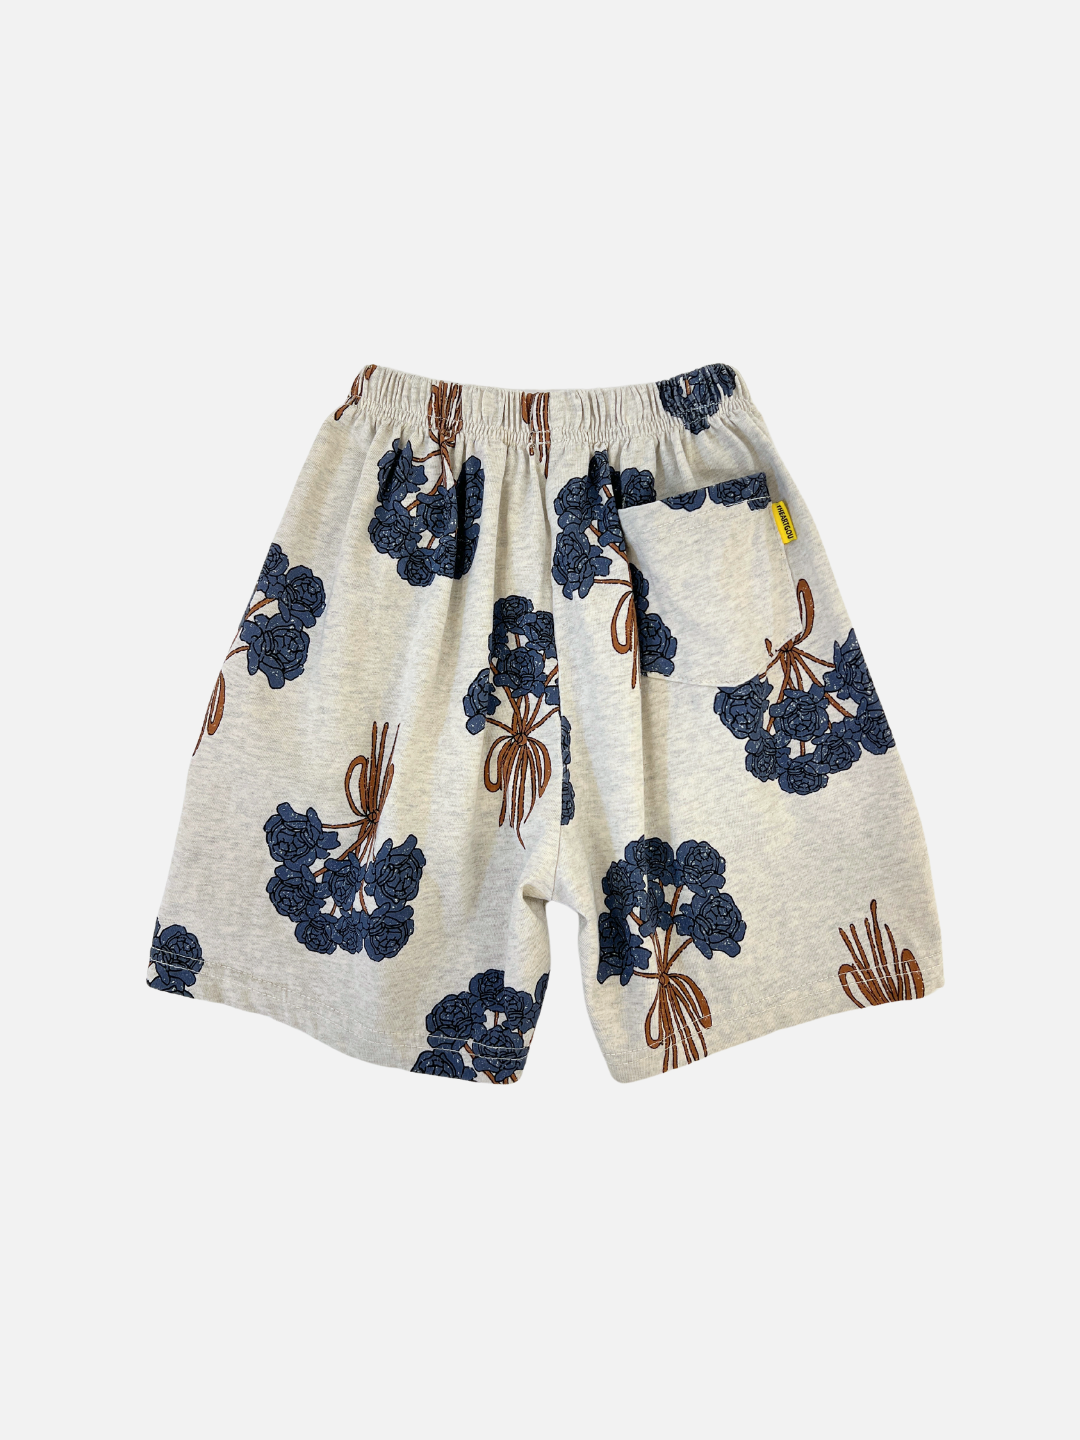 Back view of the kids' Bouquet Shorts. warm gray cotton fabric with an all-over navy roses bouquet print. Back pocket on the right side.